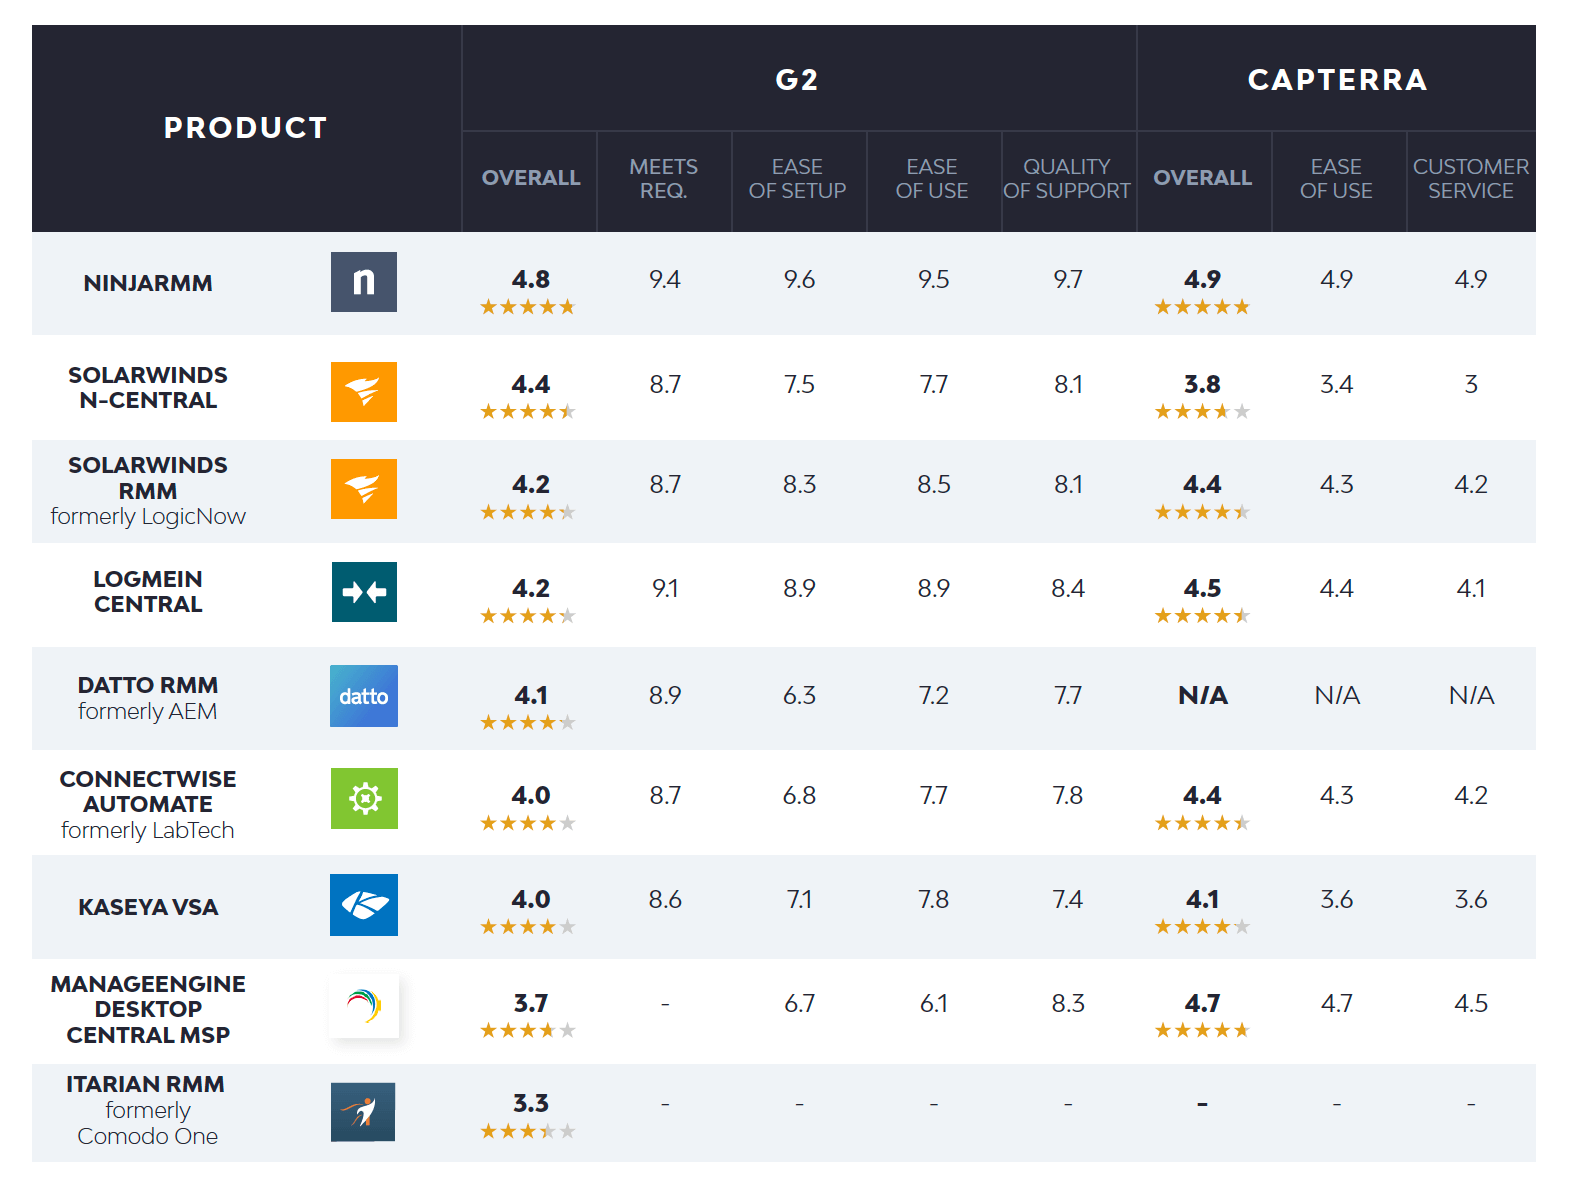 Ninja is rated 4.8 out of 5 by G2 and 4.9 out of 5 by Capterra in their RMM Software Ratings